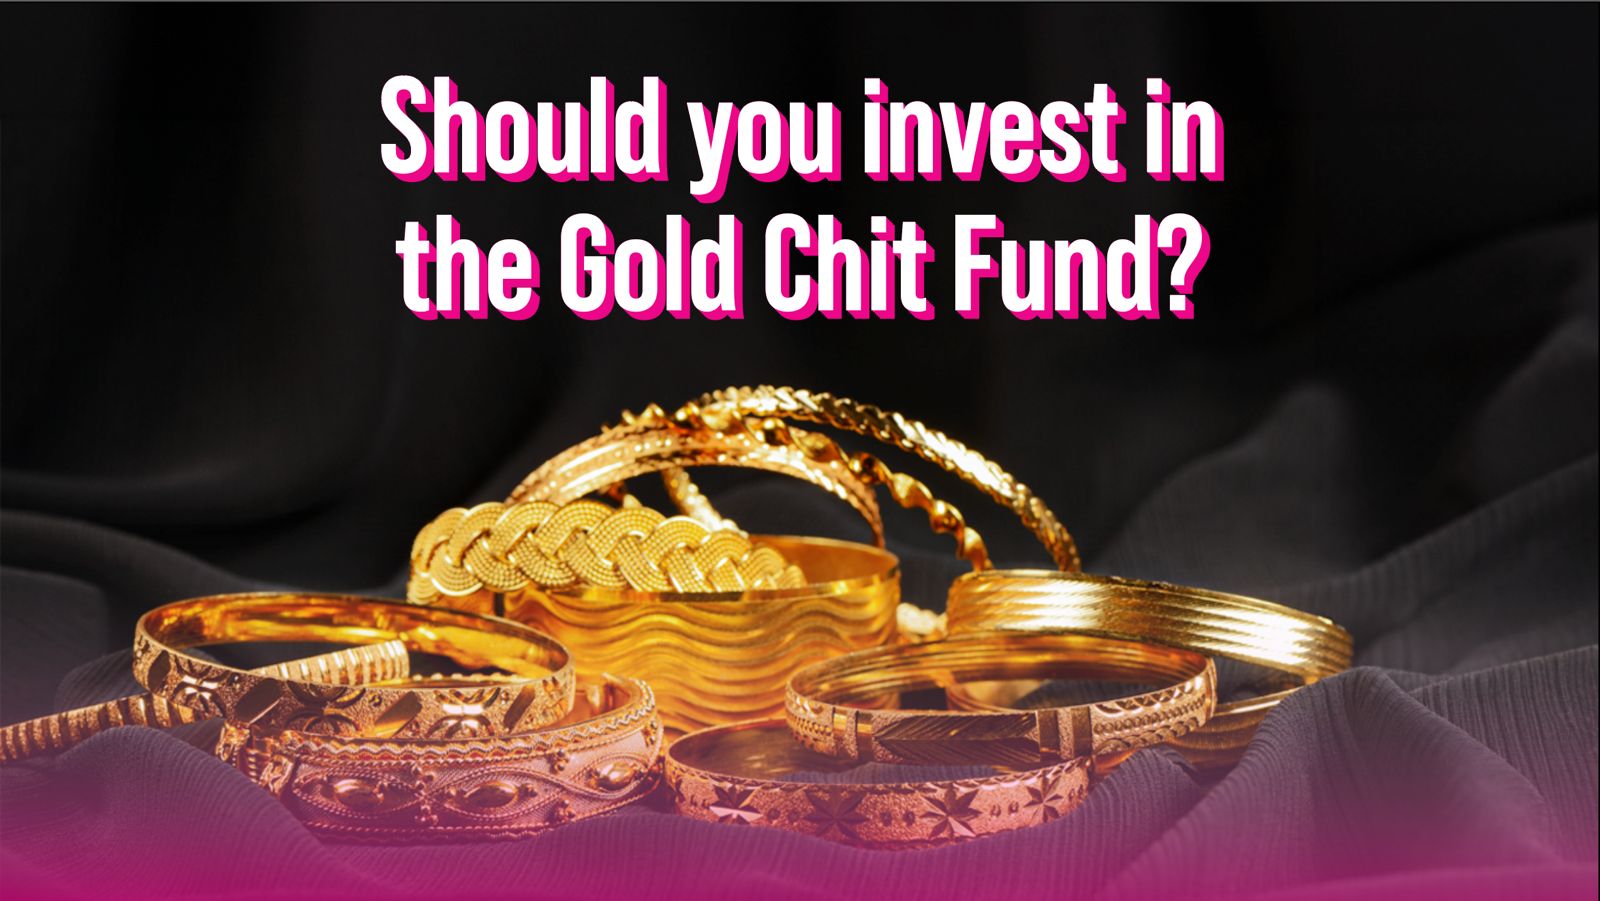 Should you invest in gold chit fund?